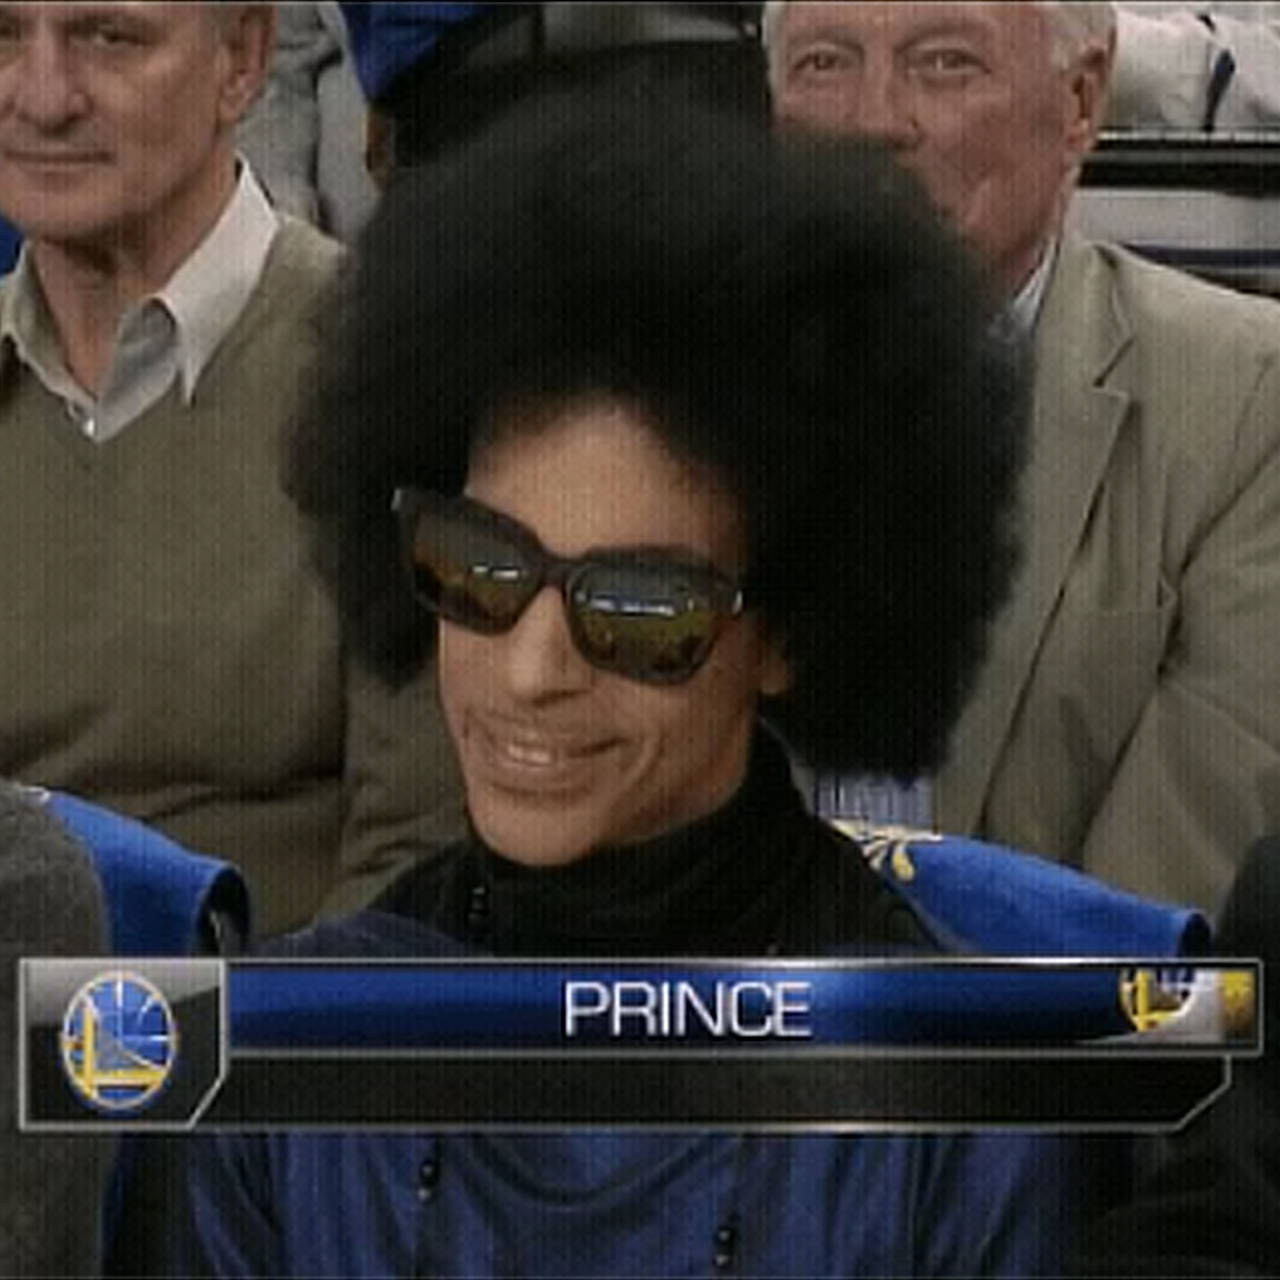 Prince attends Warriors game at Oracle Arena